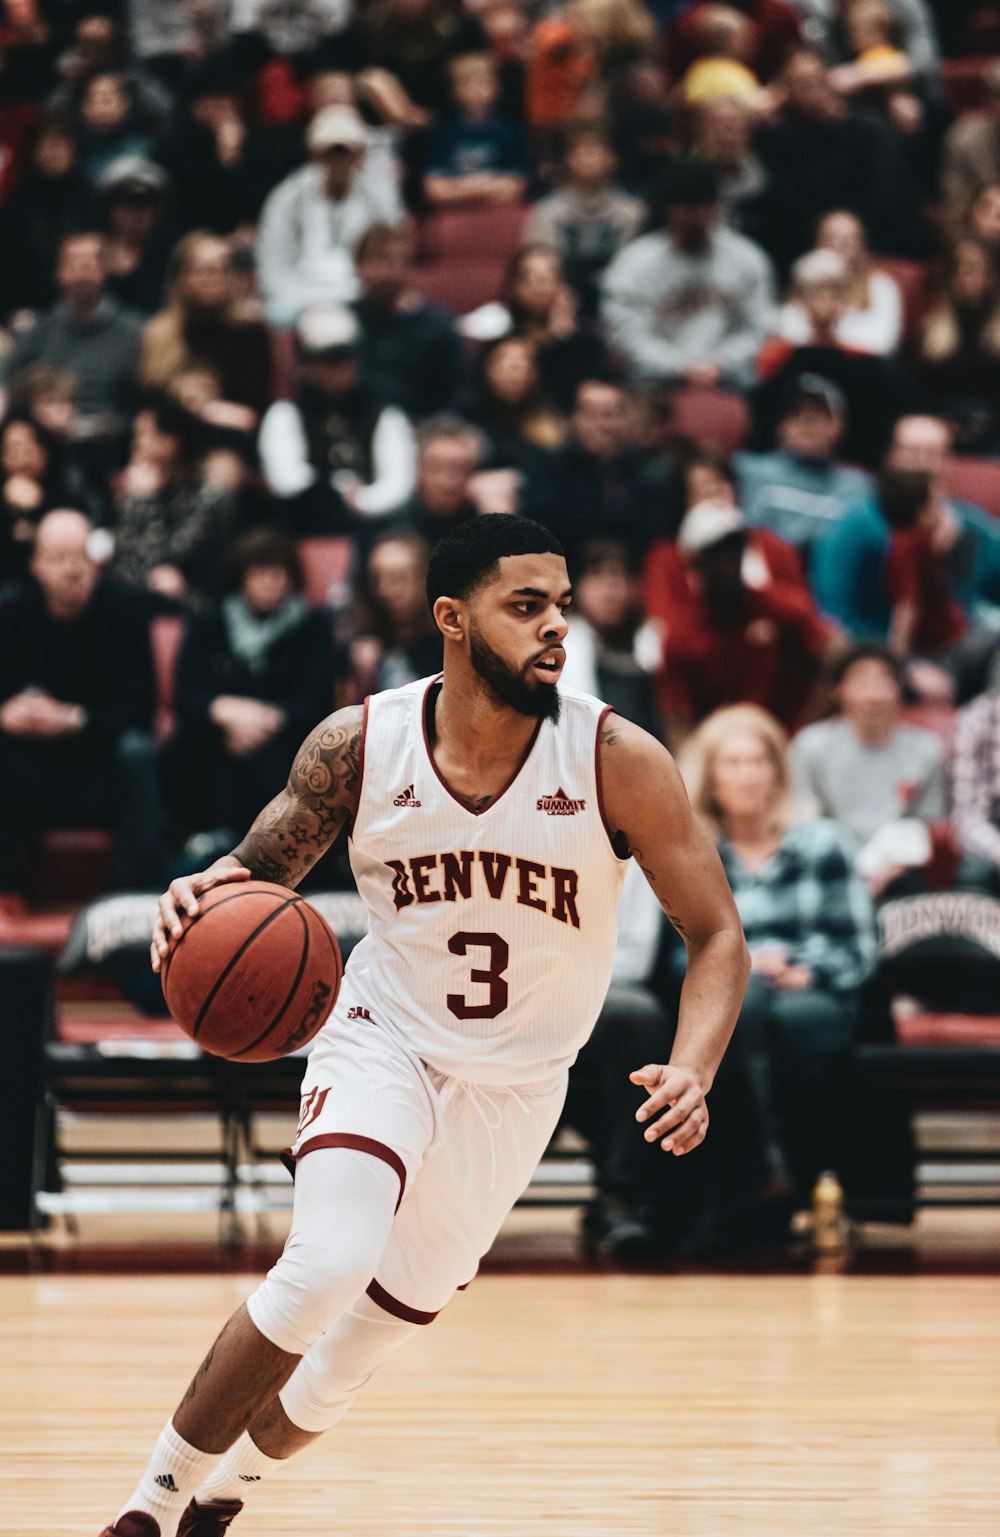 350+ Basketball Player Pictures [HD] | Download Free Images & Stock Photos  on Unsplash